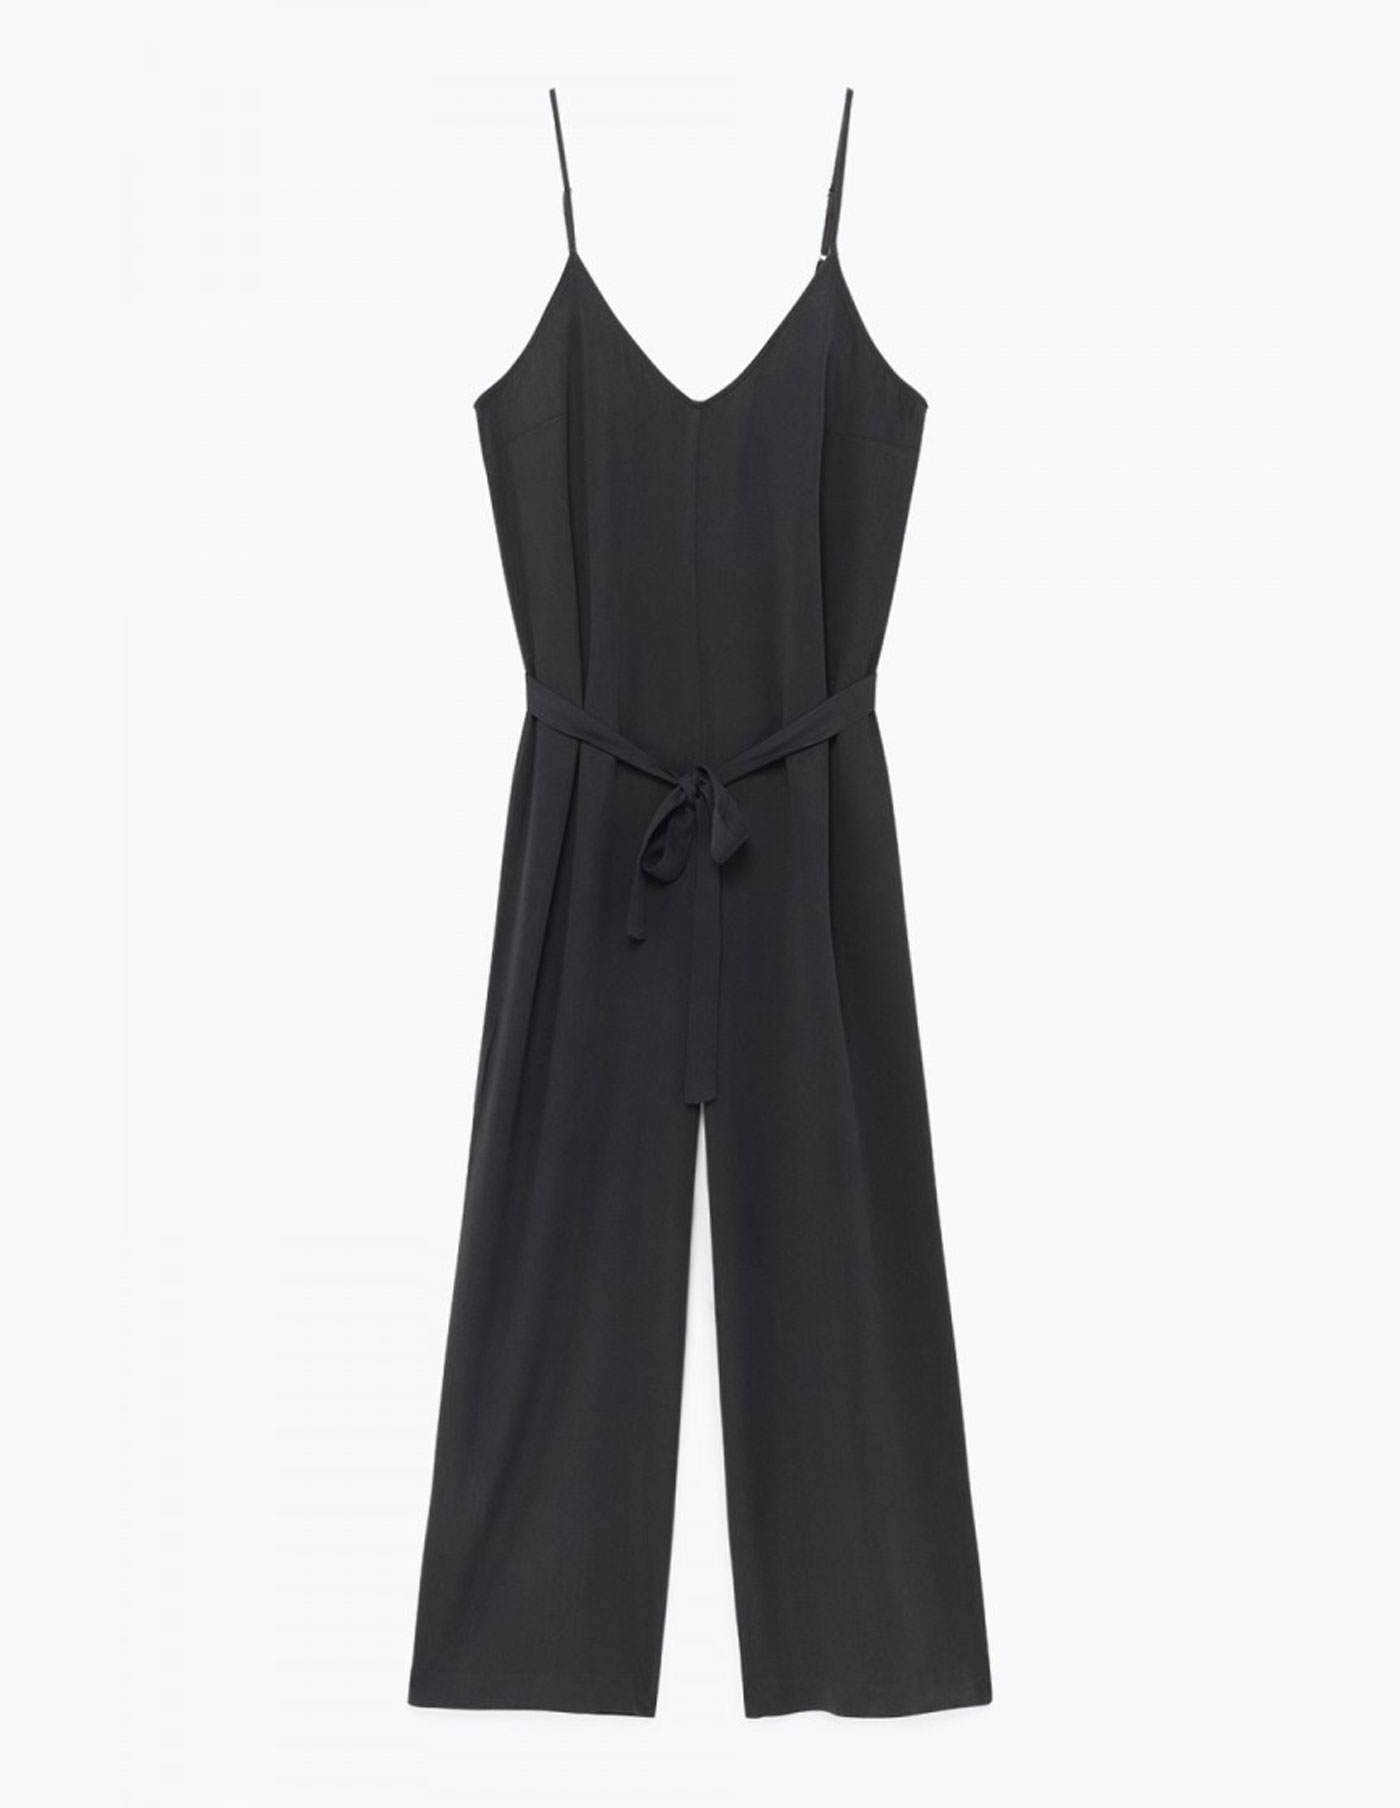 American Vintage Nalastate Jumpsuit in Carbone at Storm Fashion